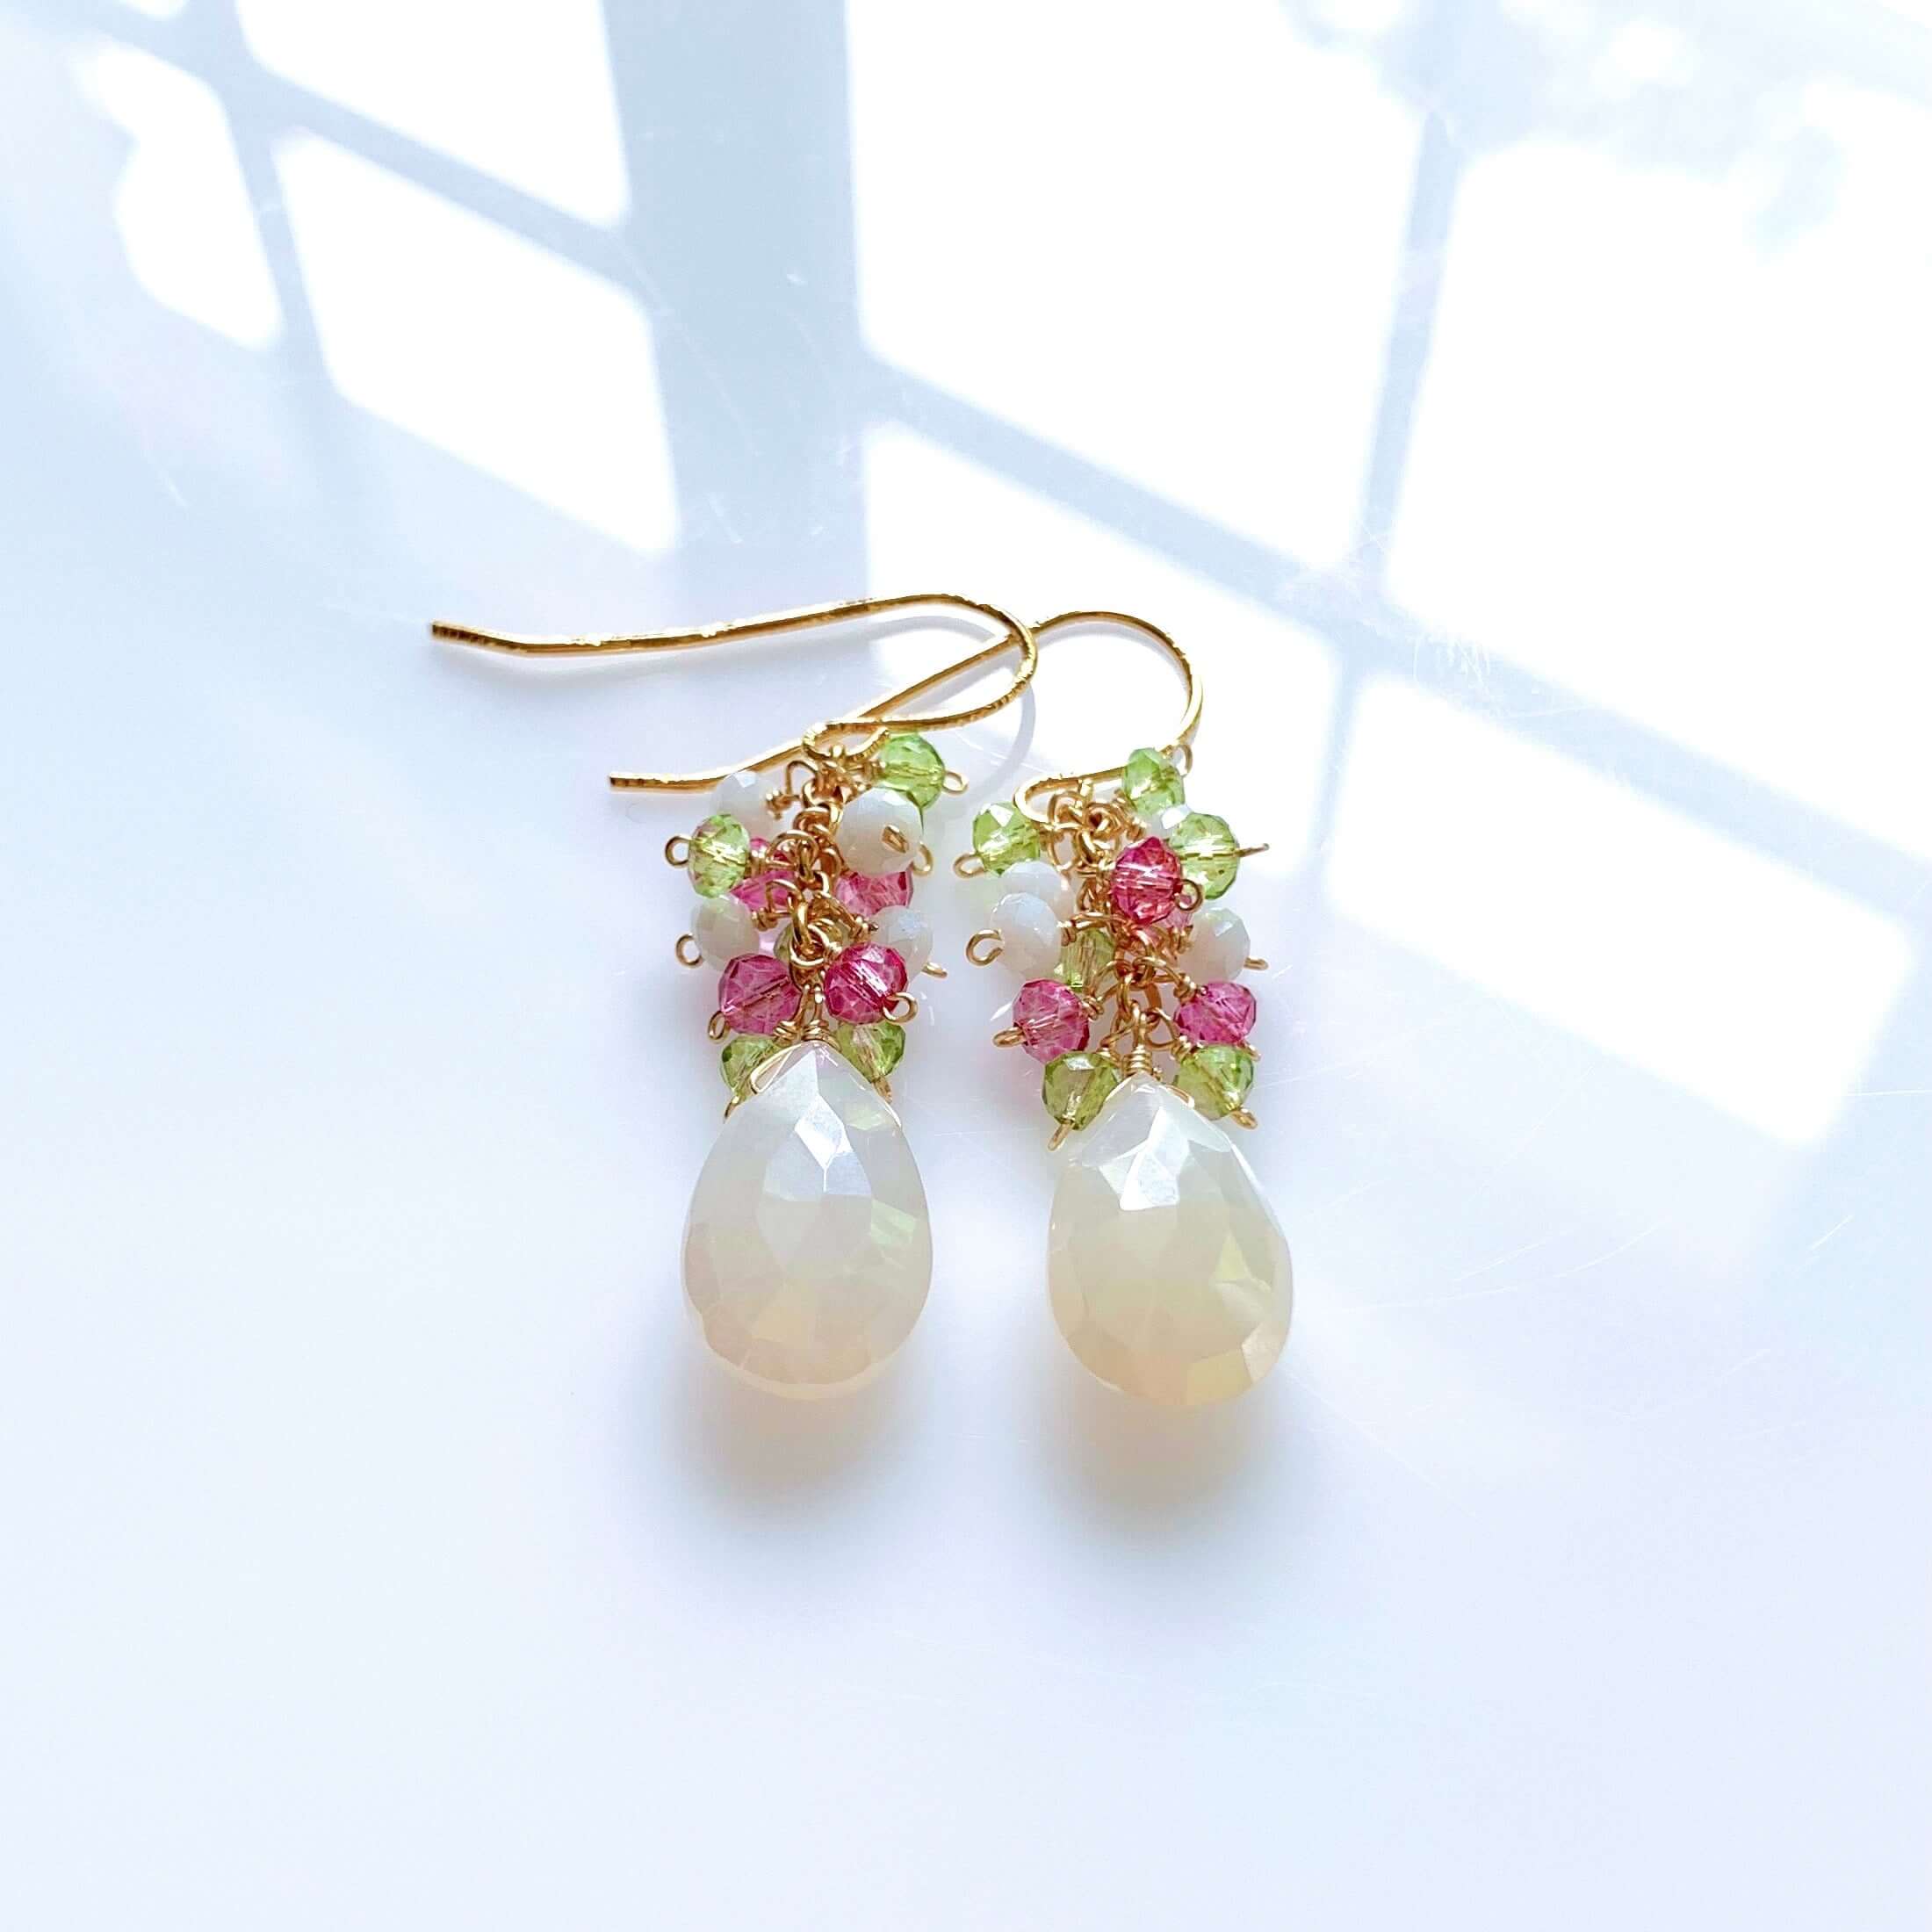 White Chalcedony stone topped with multi-colored cluster of gems Gold Earrings 